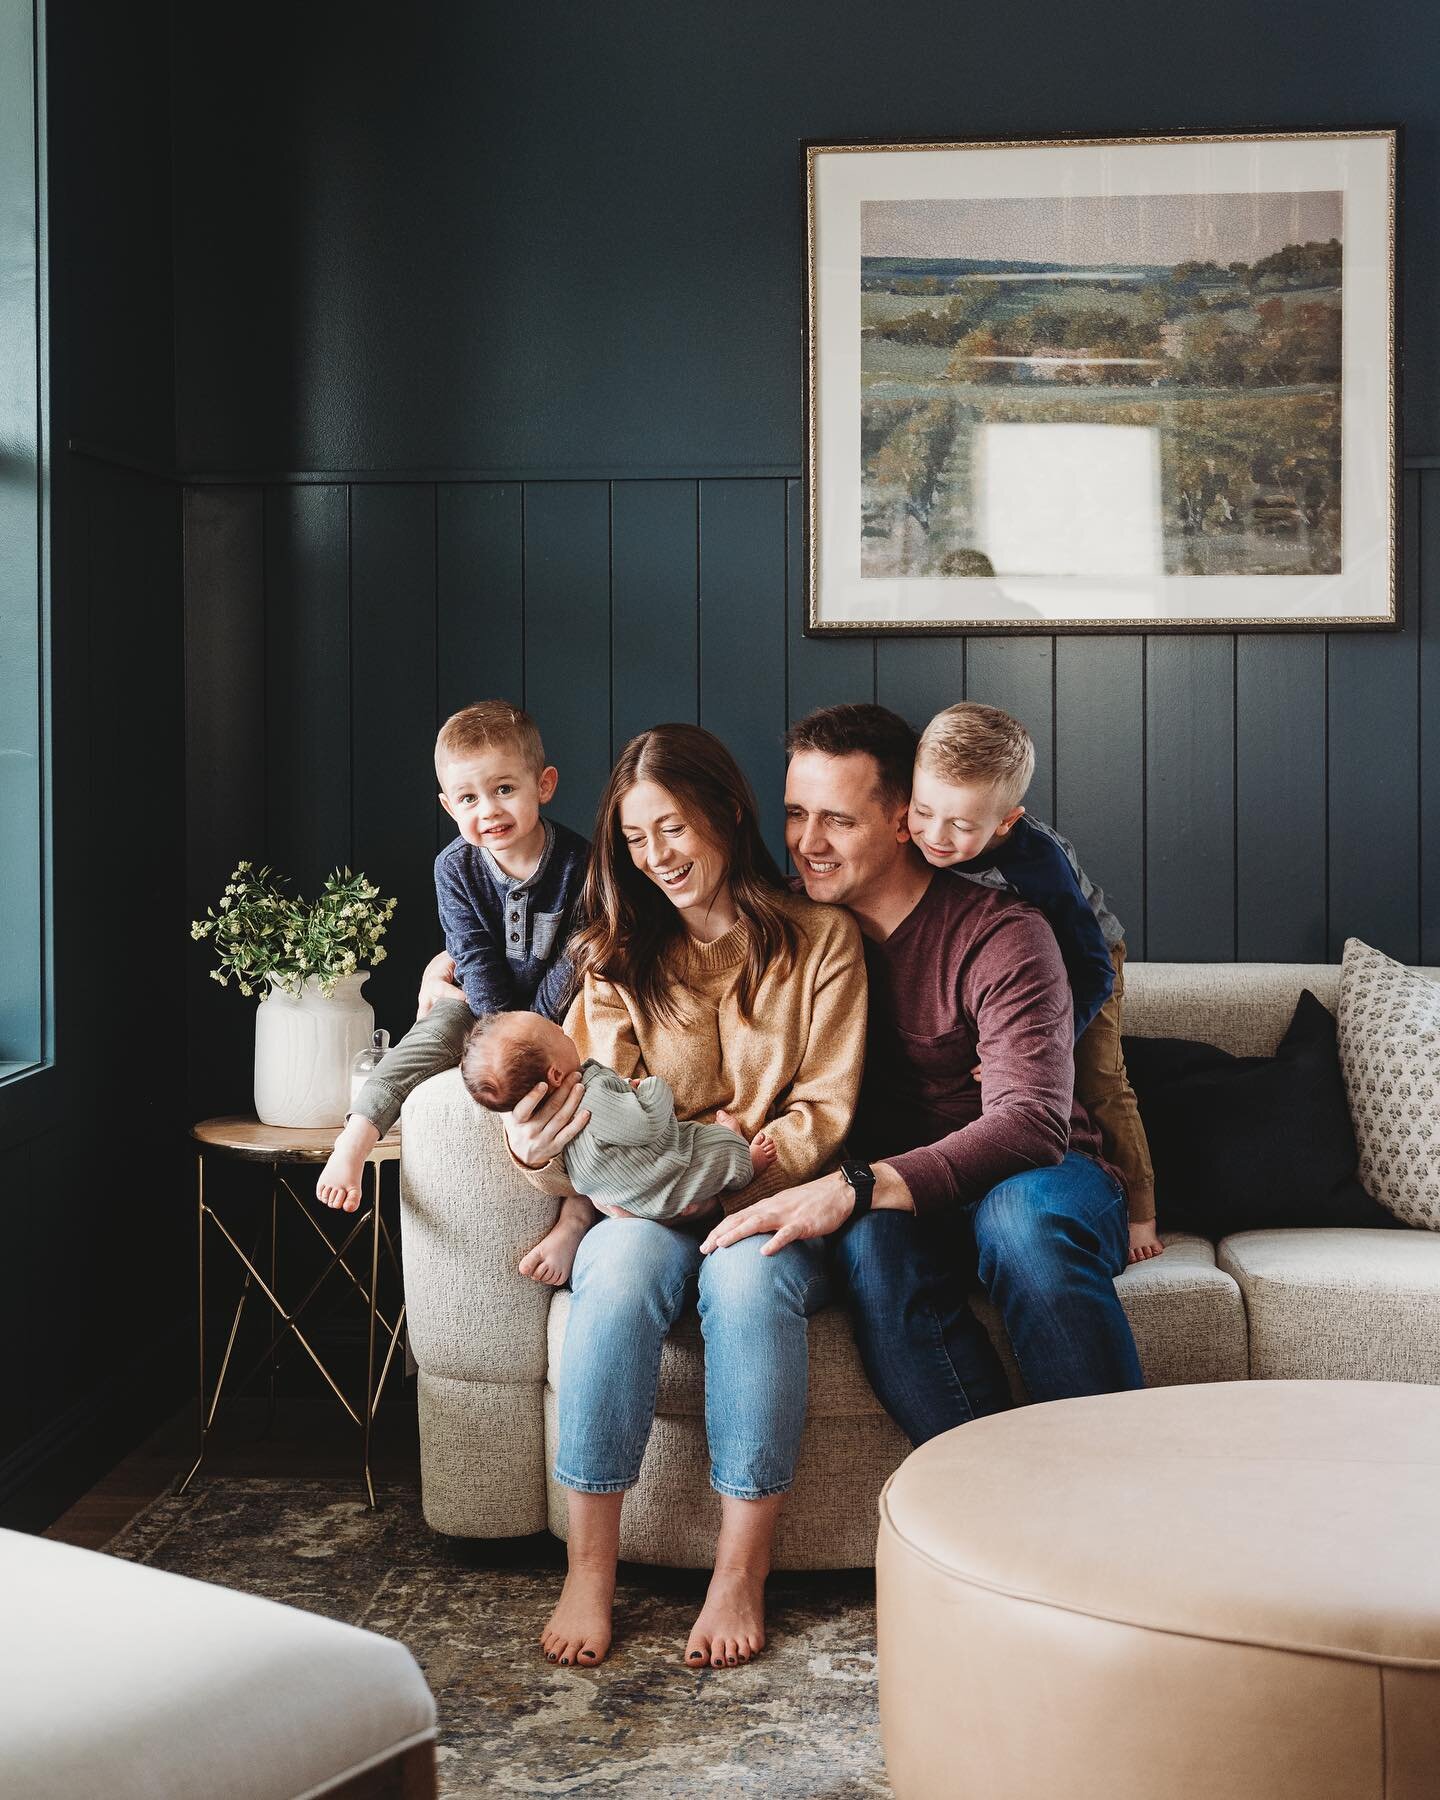 After this session, I started looking at ways I could paint my entire house this color of blue! I love this mama and her boys!